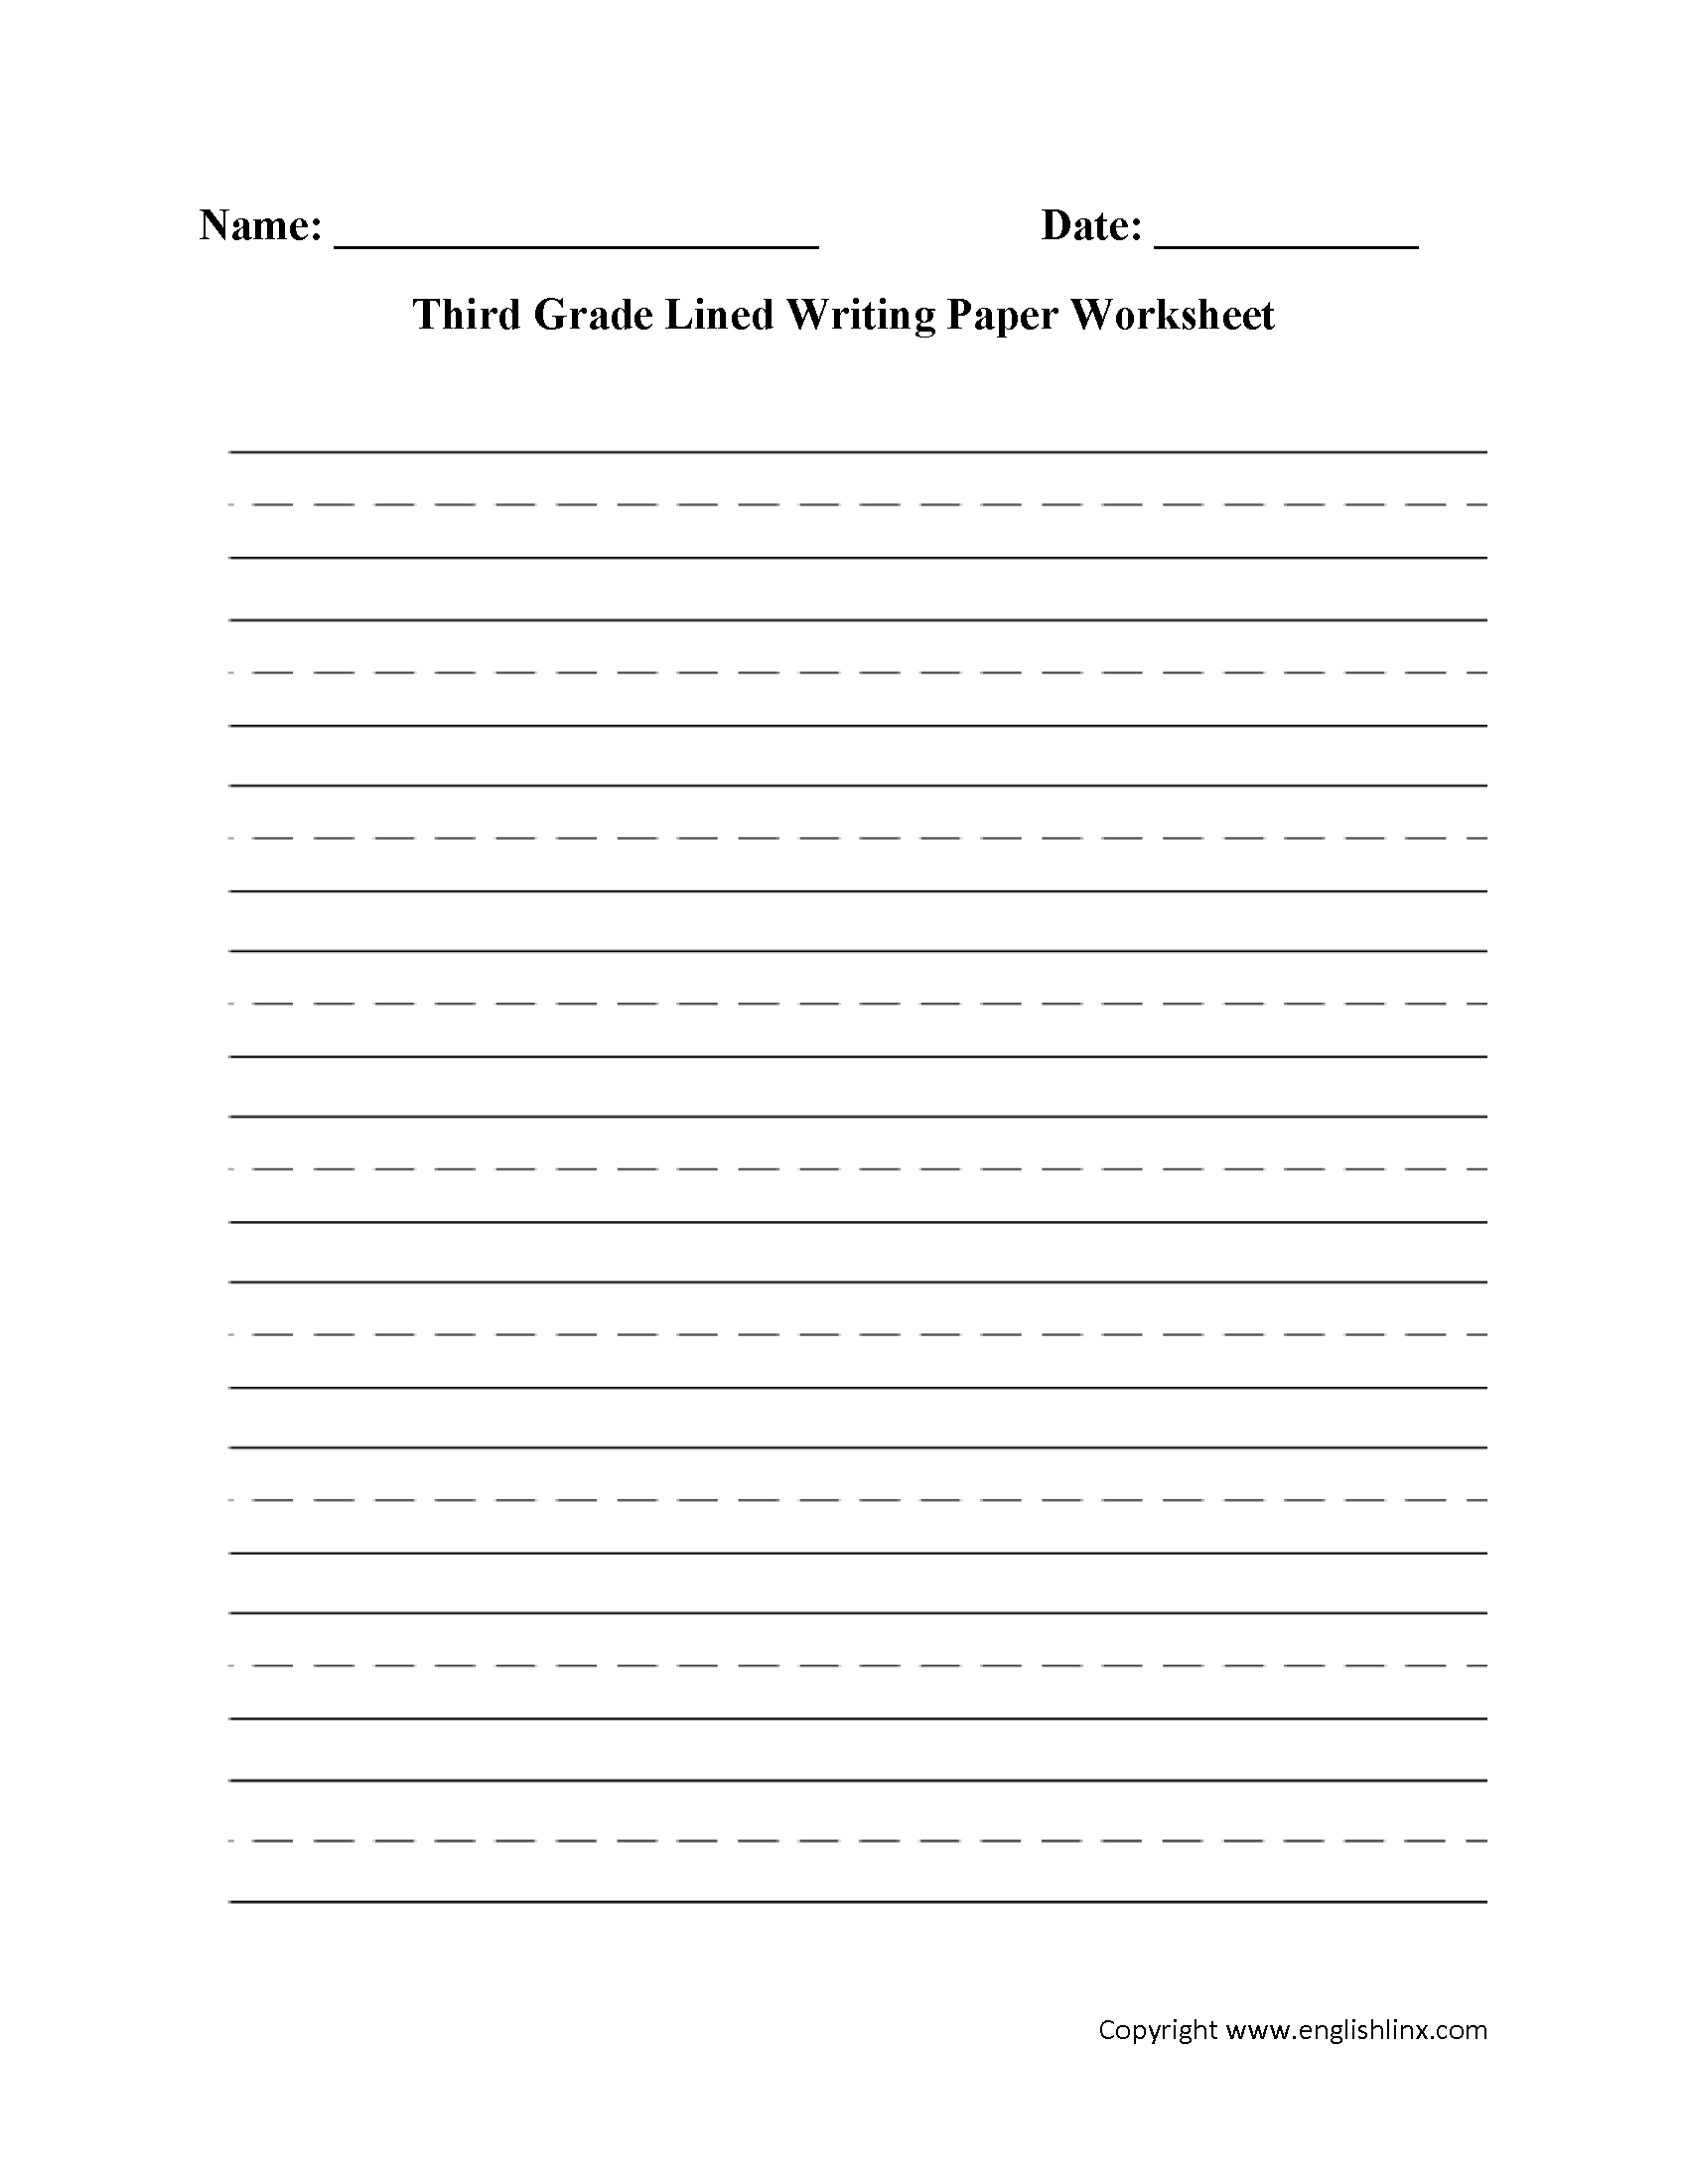 Writing Worksheets | Lined Writing Paper Worksheets - Free Printable Writing Paper For Adults